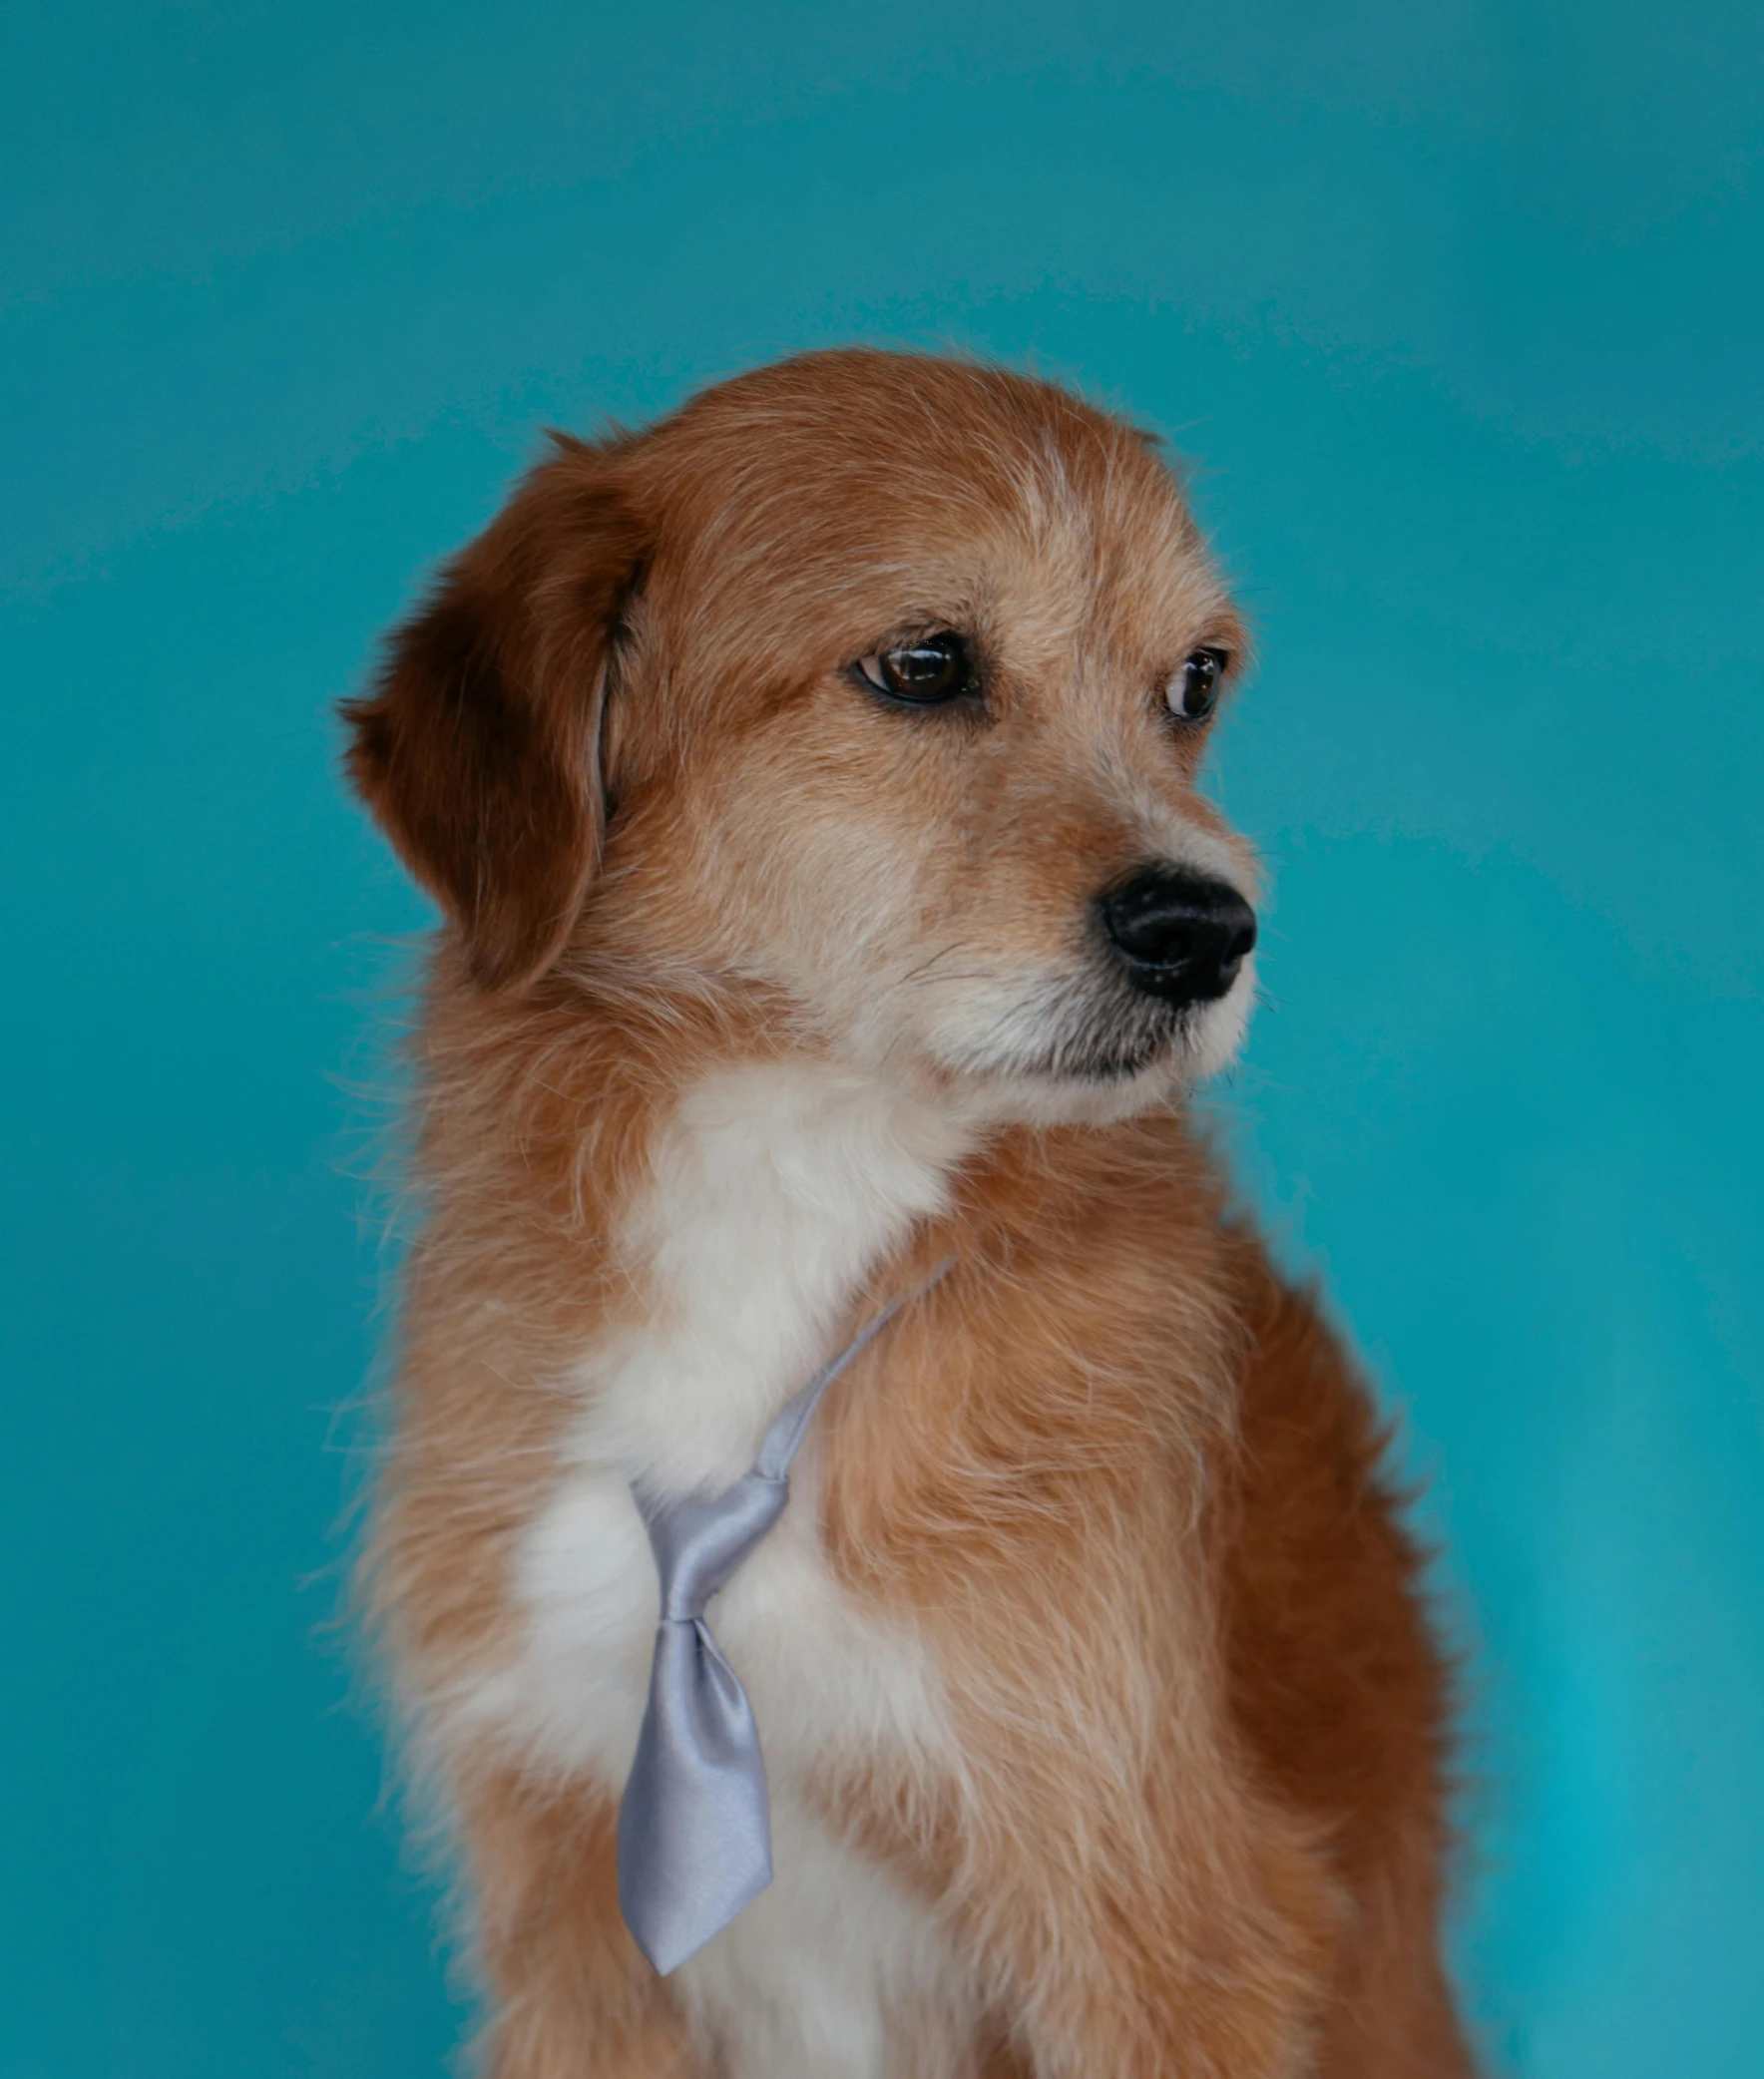 a dog wears a tie on his neck